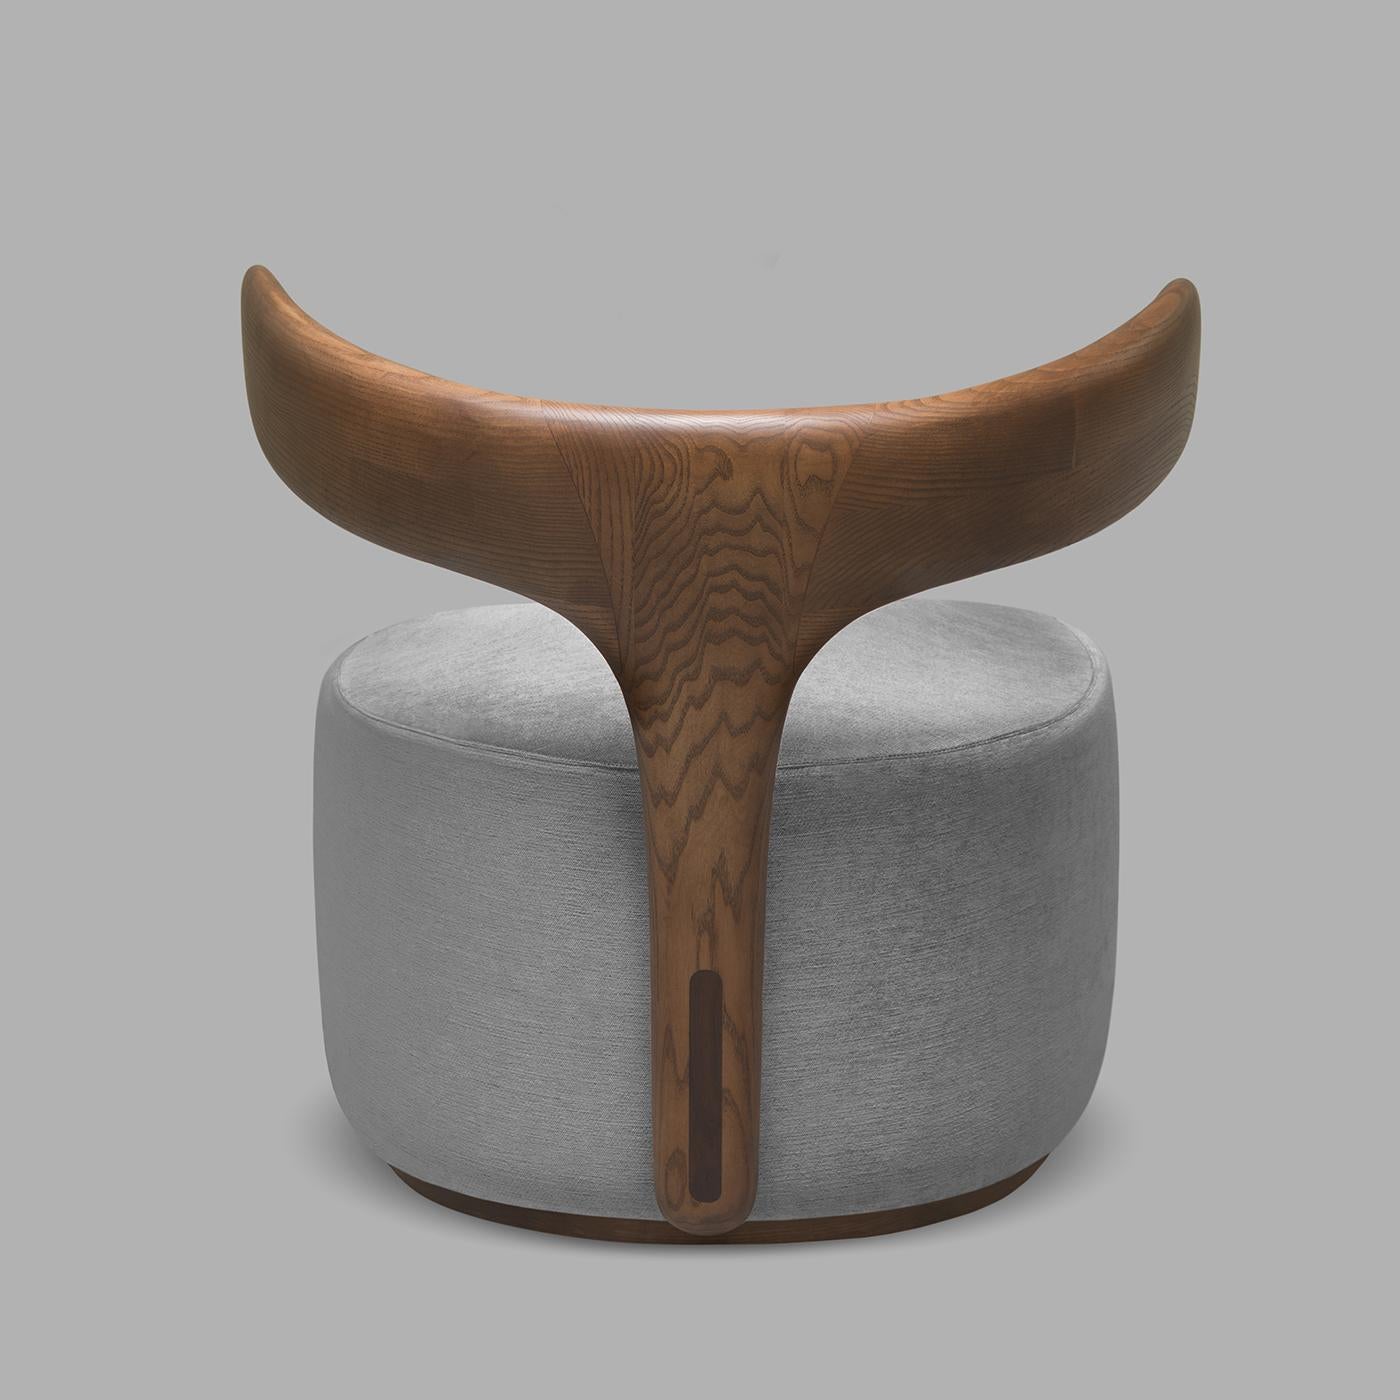 Moby Dick is an armchair with an iconic and enveloping ash backrest evoking a whale tail. The armchair is made of walnut ash wood with a structure that recalls the tail of a whale. The seat is padded and covered in gray fabric. Thanks to its